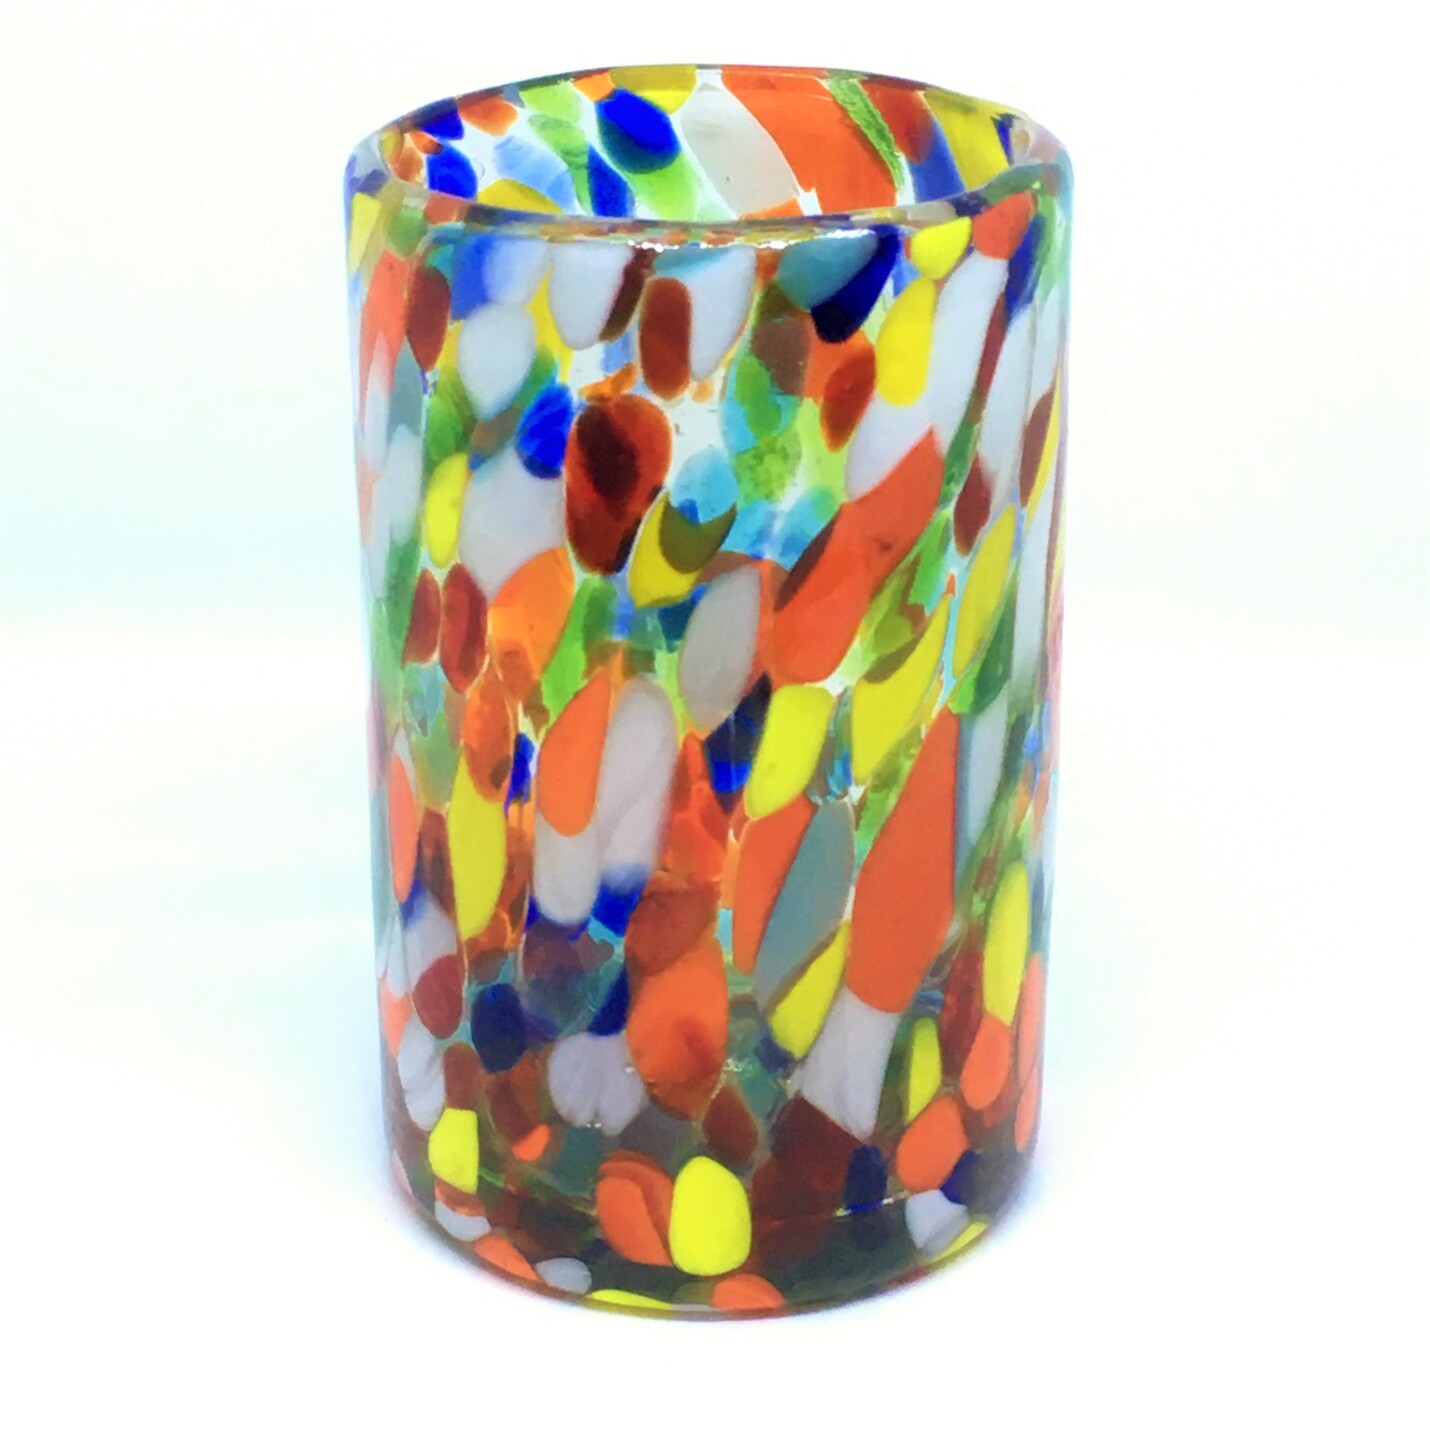 Wholesale Mexican Glasses / Confetti Carnival 14 oz Drinking Glasses  / Let the spring come into your home with this colorful set of glasses. The multicolor glass decoration makes them a standout in any place.